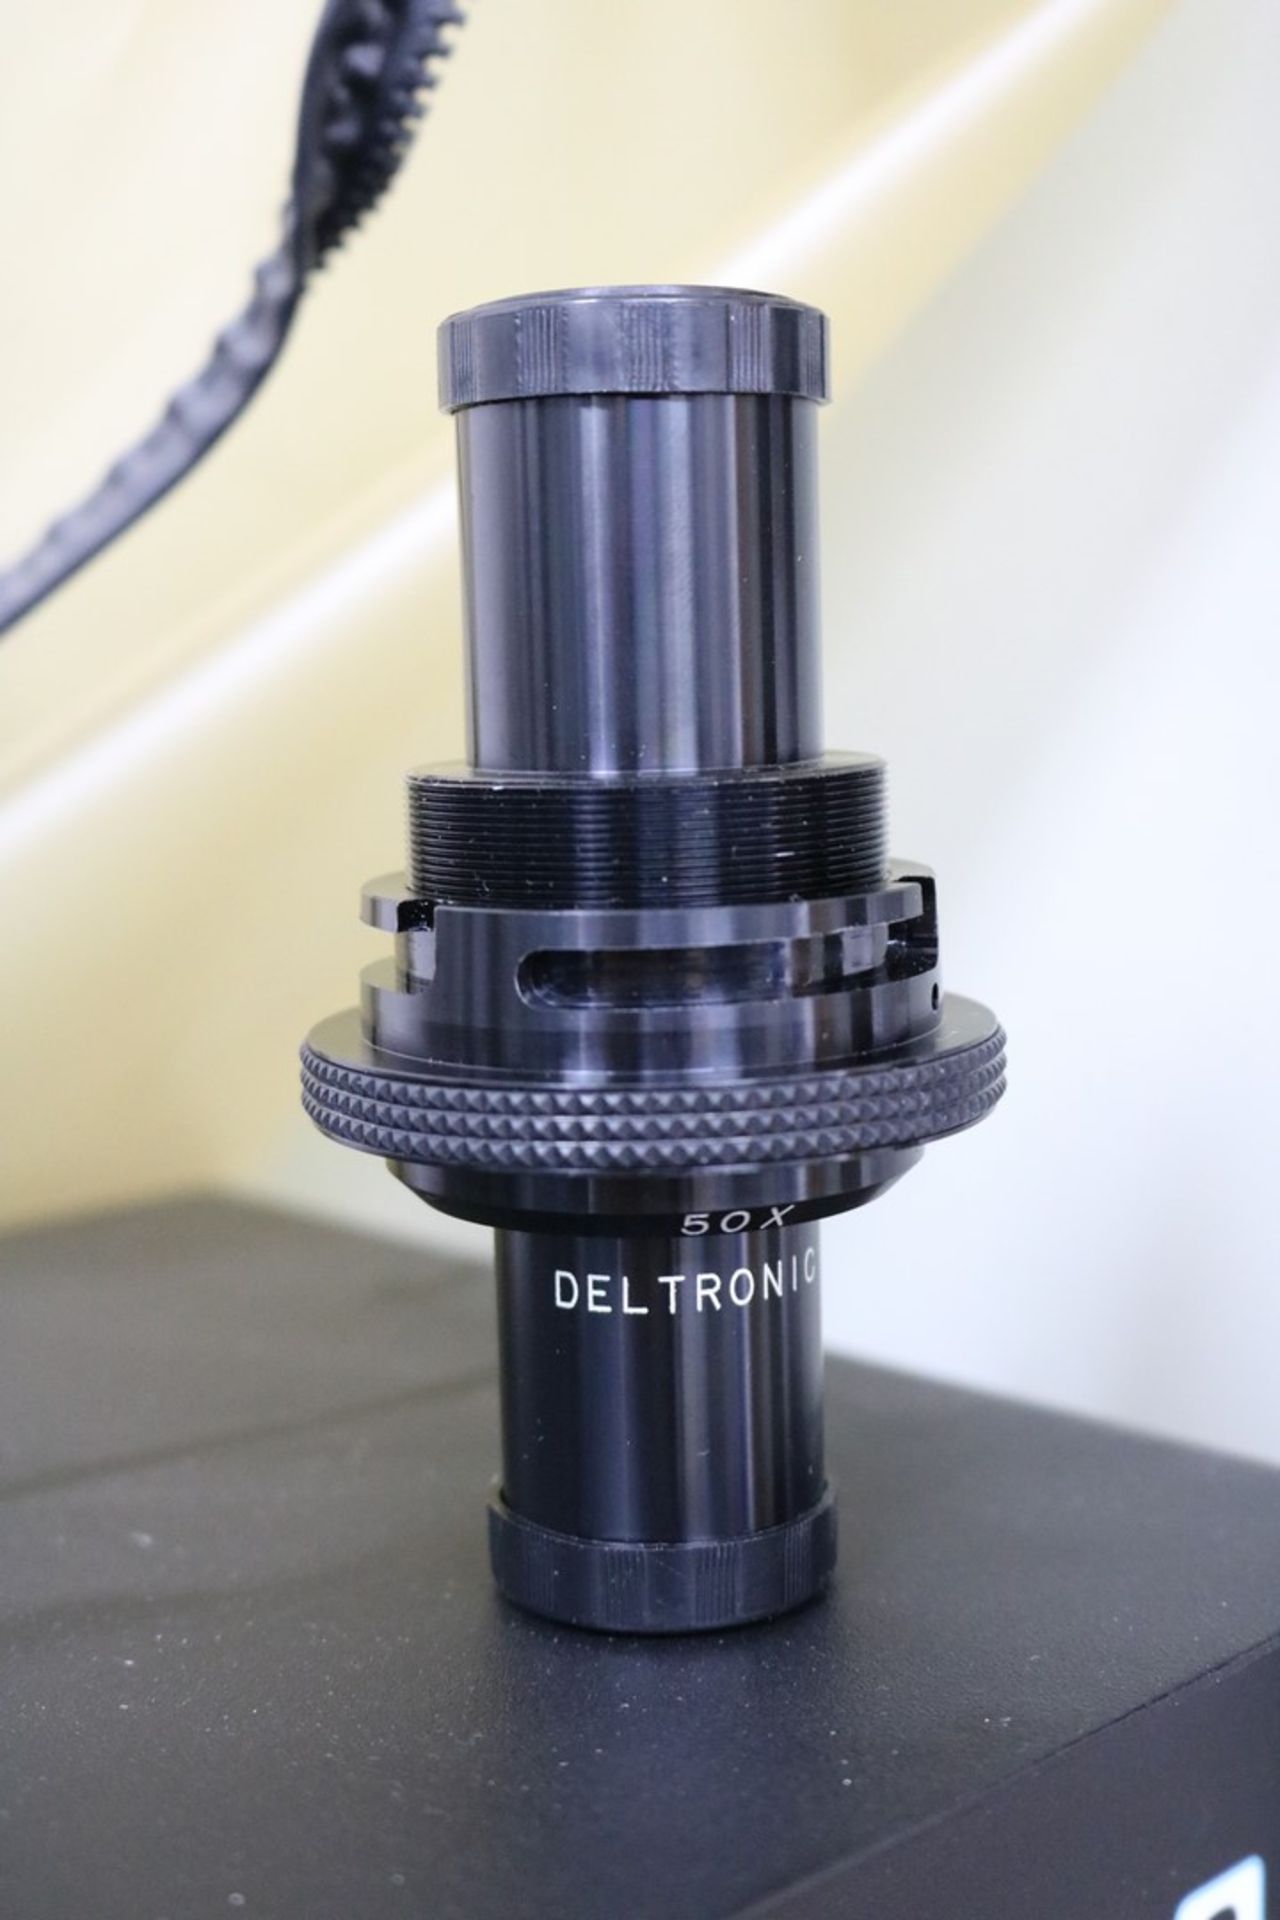 Deltronic DH214 Optical Comparitor with Deltronic 612-R DRO Includes Inspection Accessories - Image 6 of 9